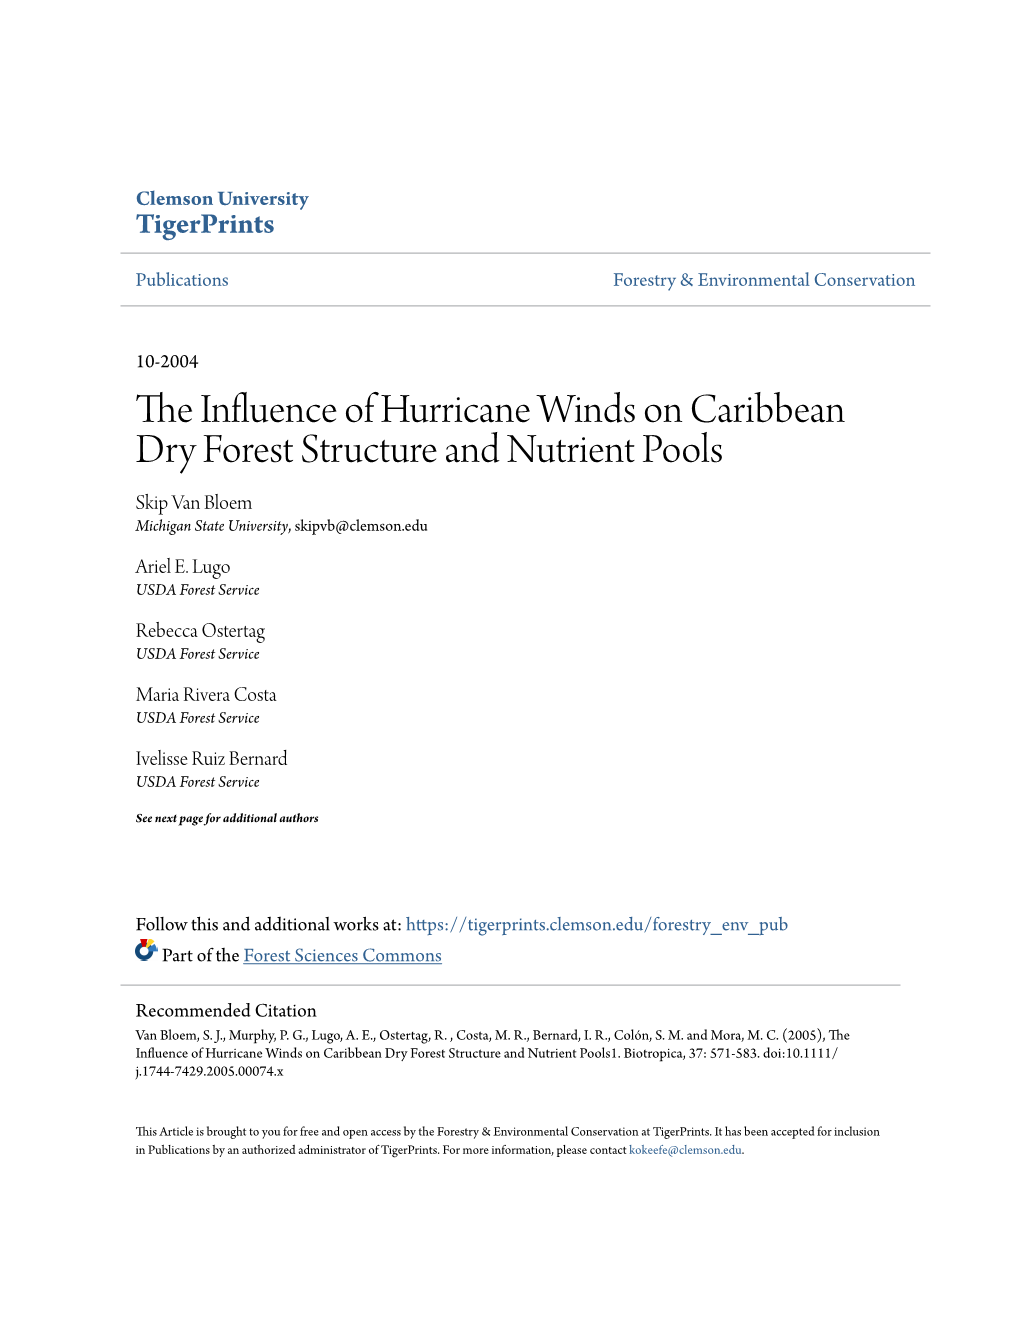 The Influence of Hurricane Winds on Caribbean Dry Forest Structure and Nutrient Pools1